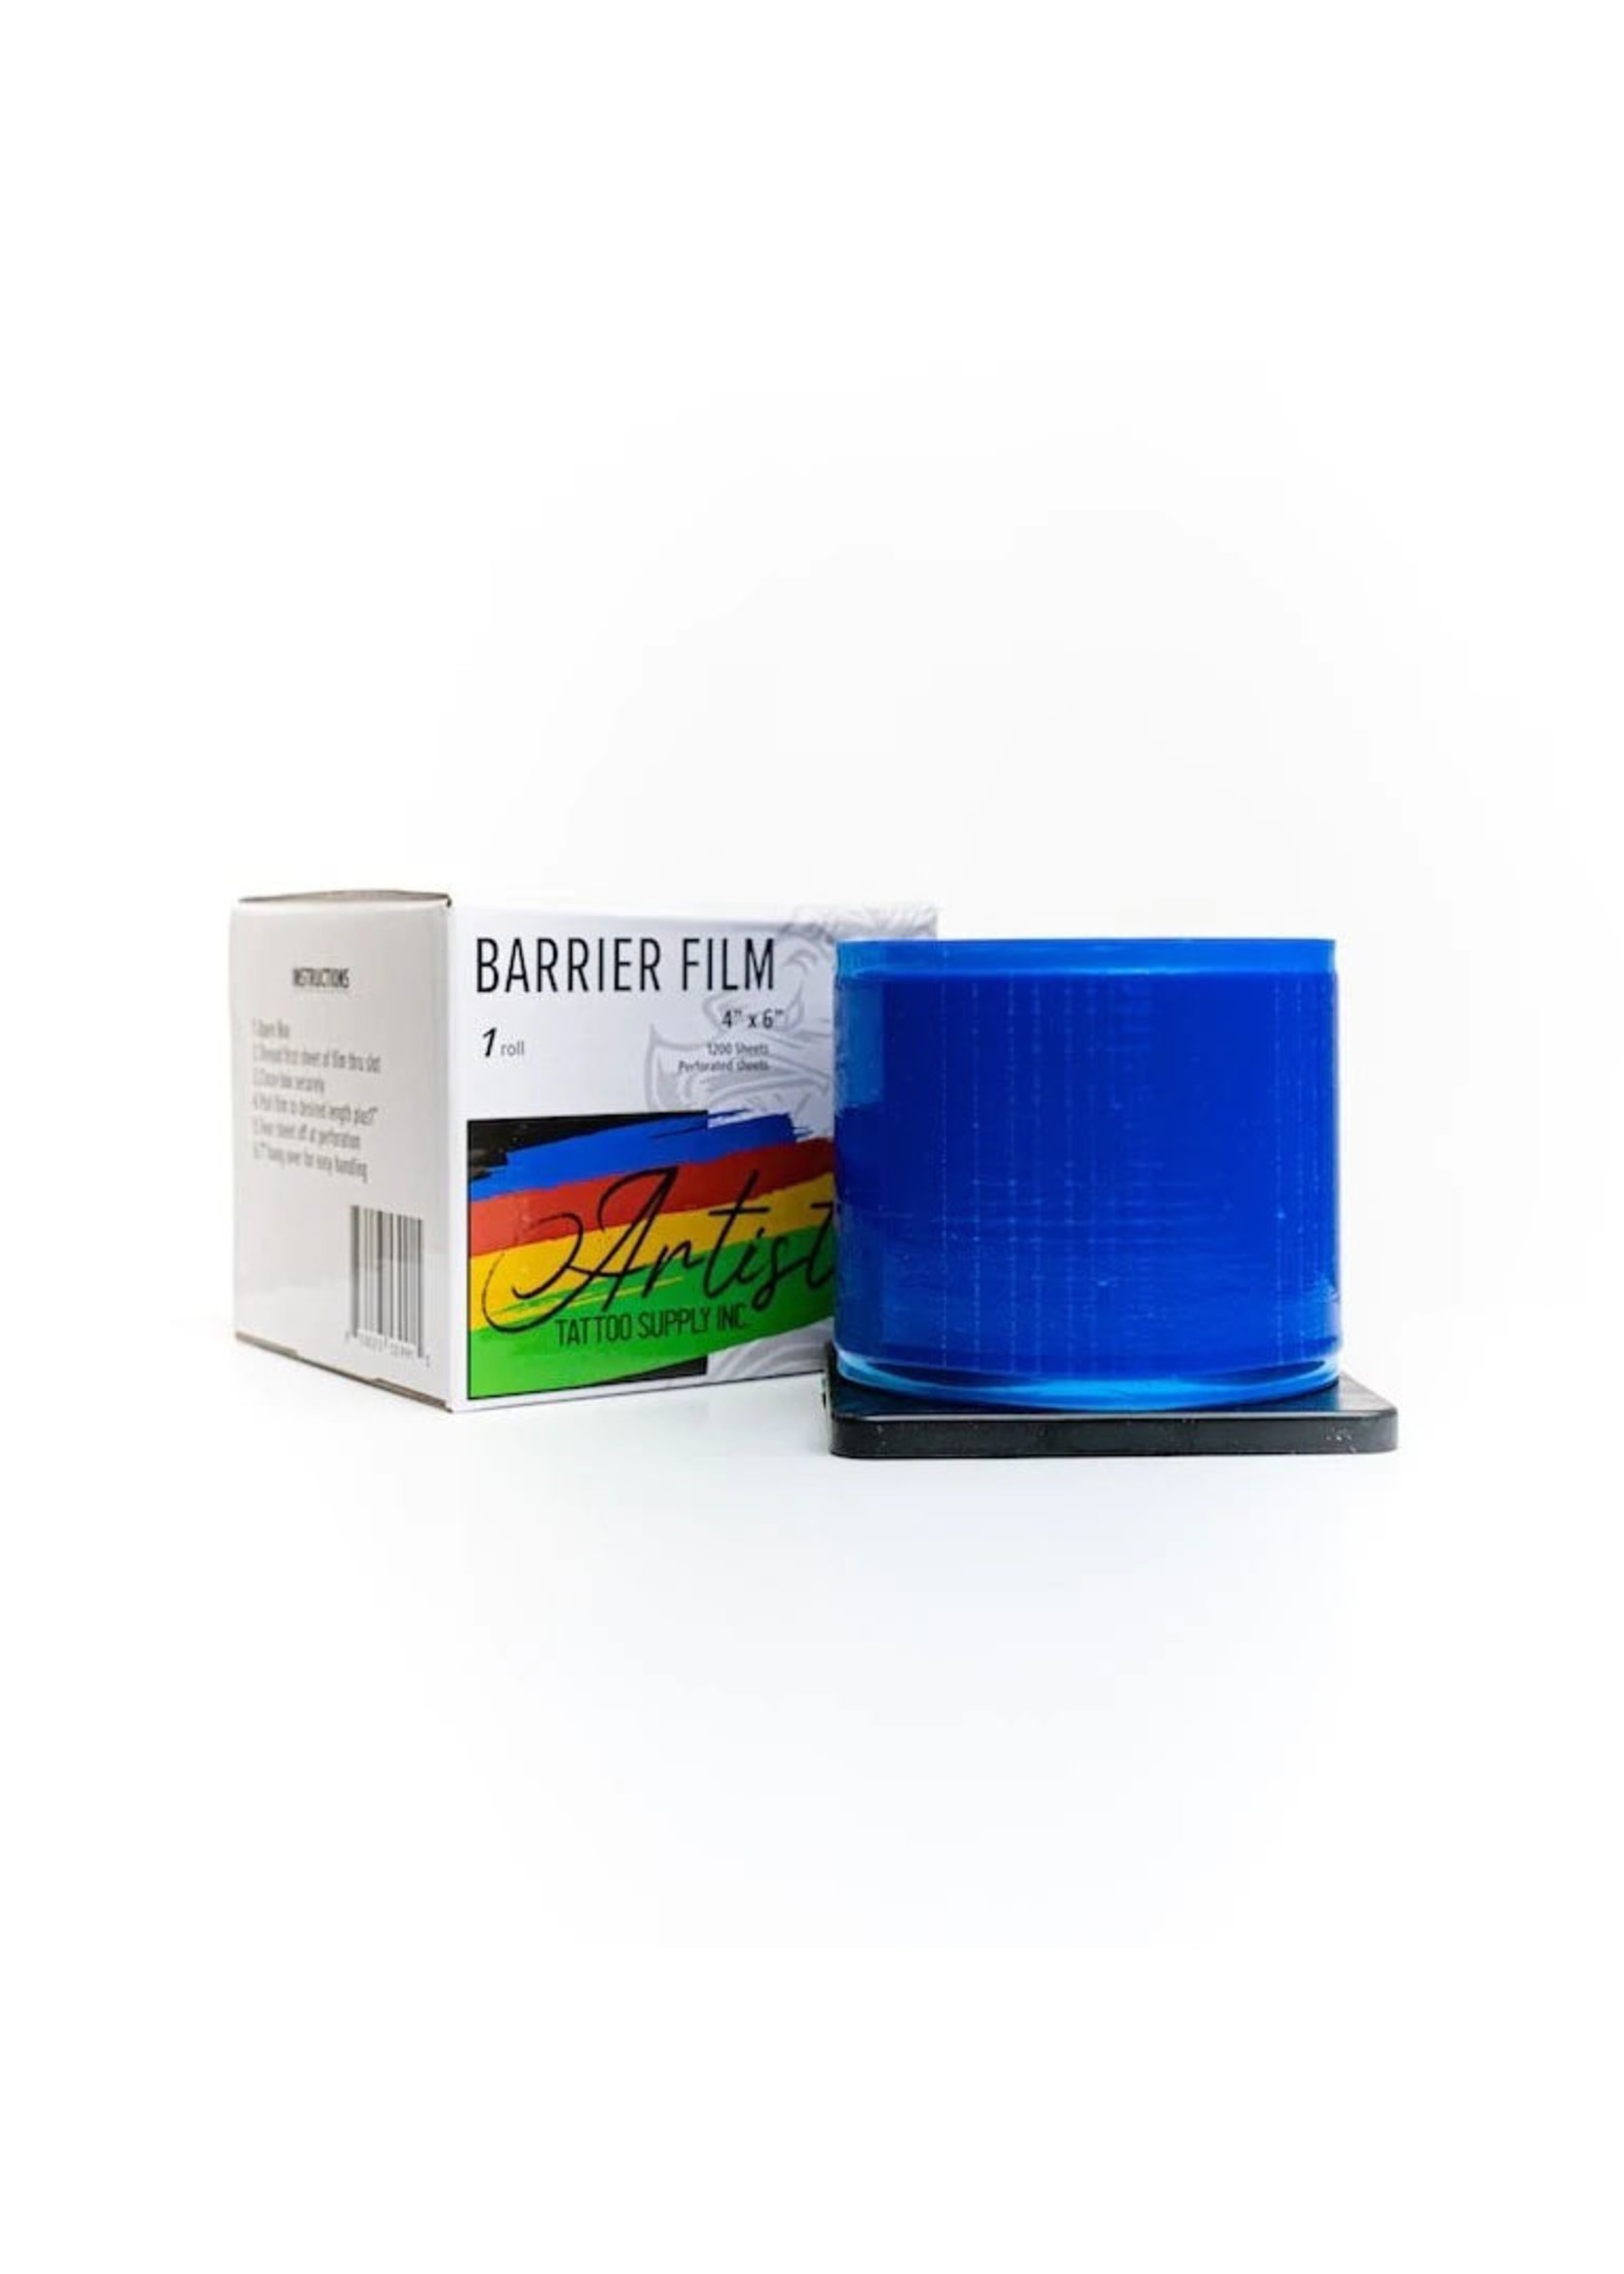 Artistic Tattoo Supply Inc. Artistic Tattoo Supply - Barrier Film Roll Tape - Blue - 4" x 6" - 1200 Sheets with Dispenser Box (600ft) - for Dental, Tattoo, and Makeup Microblading